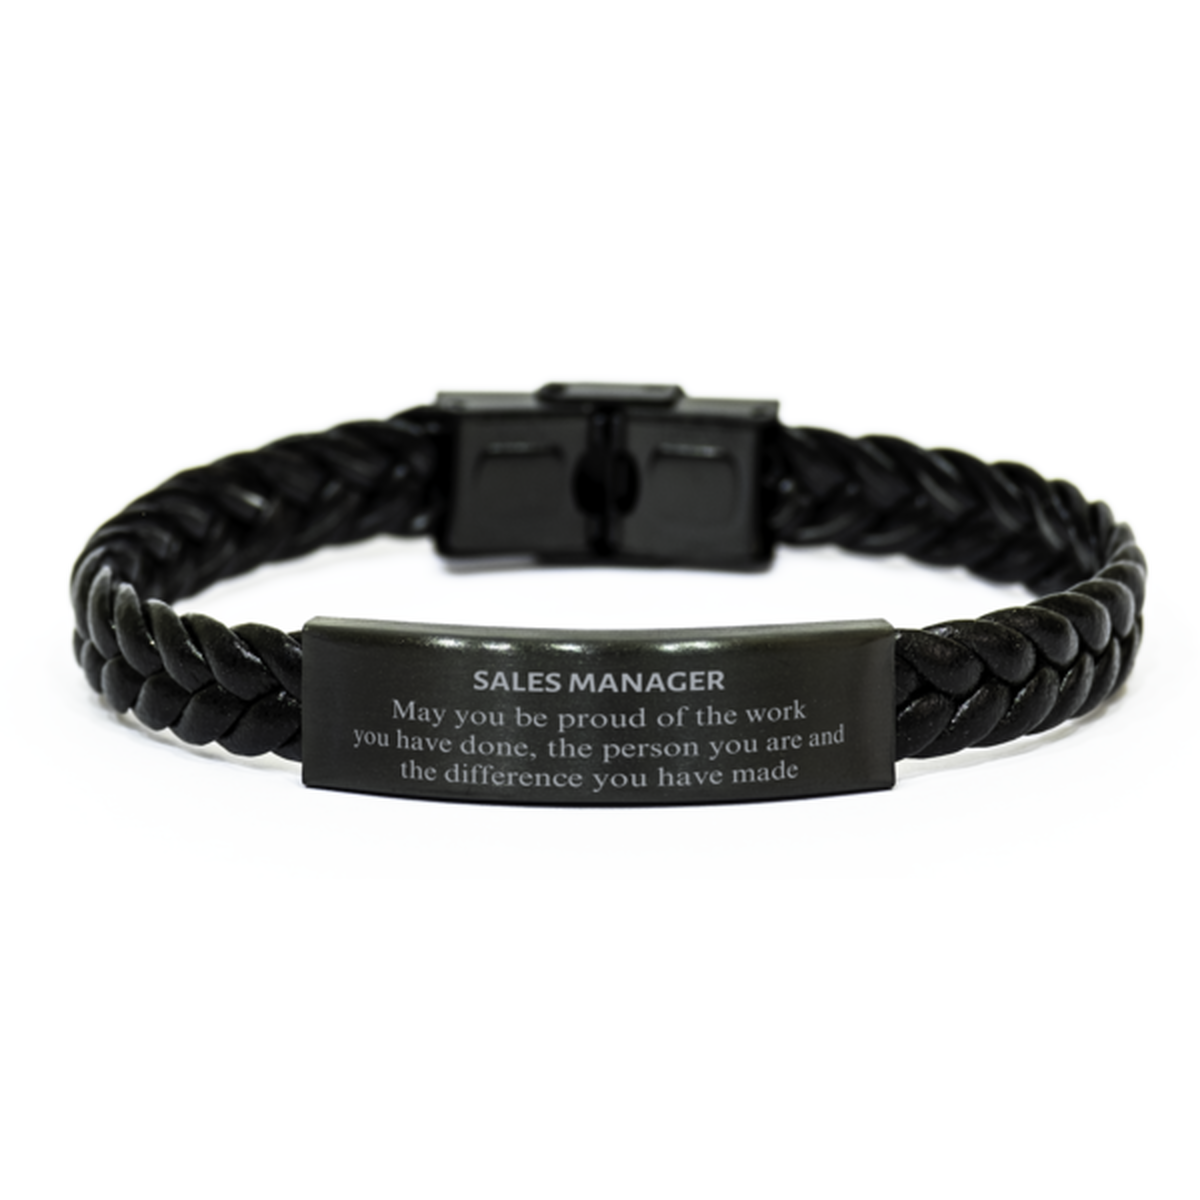 Sales Manager May you be proud of the work you have done, Retirement Sales Manager Braided Leather Bracelet for Colleague Appreciation Gifts Amazing for Sales Manager